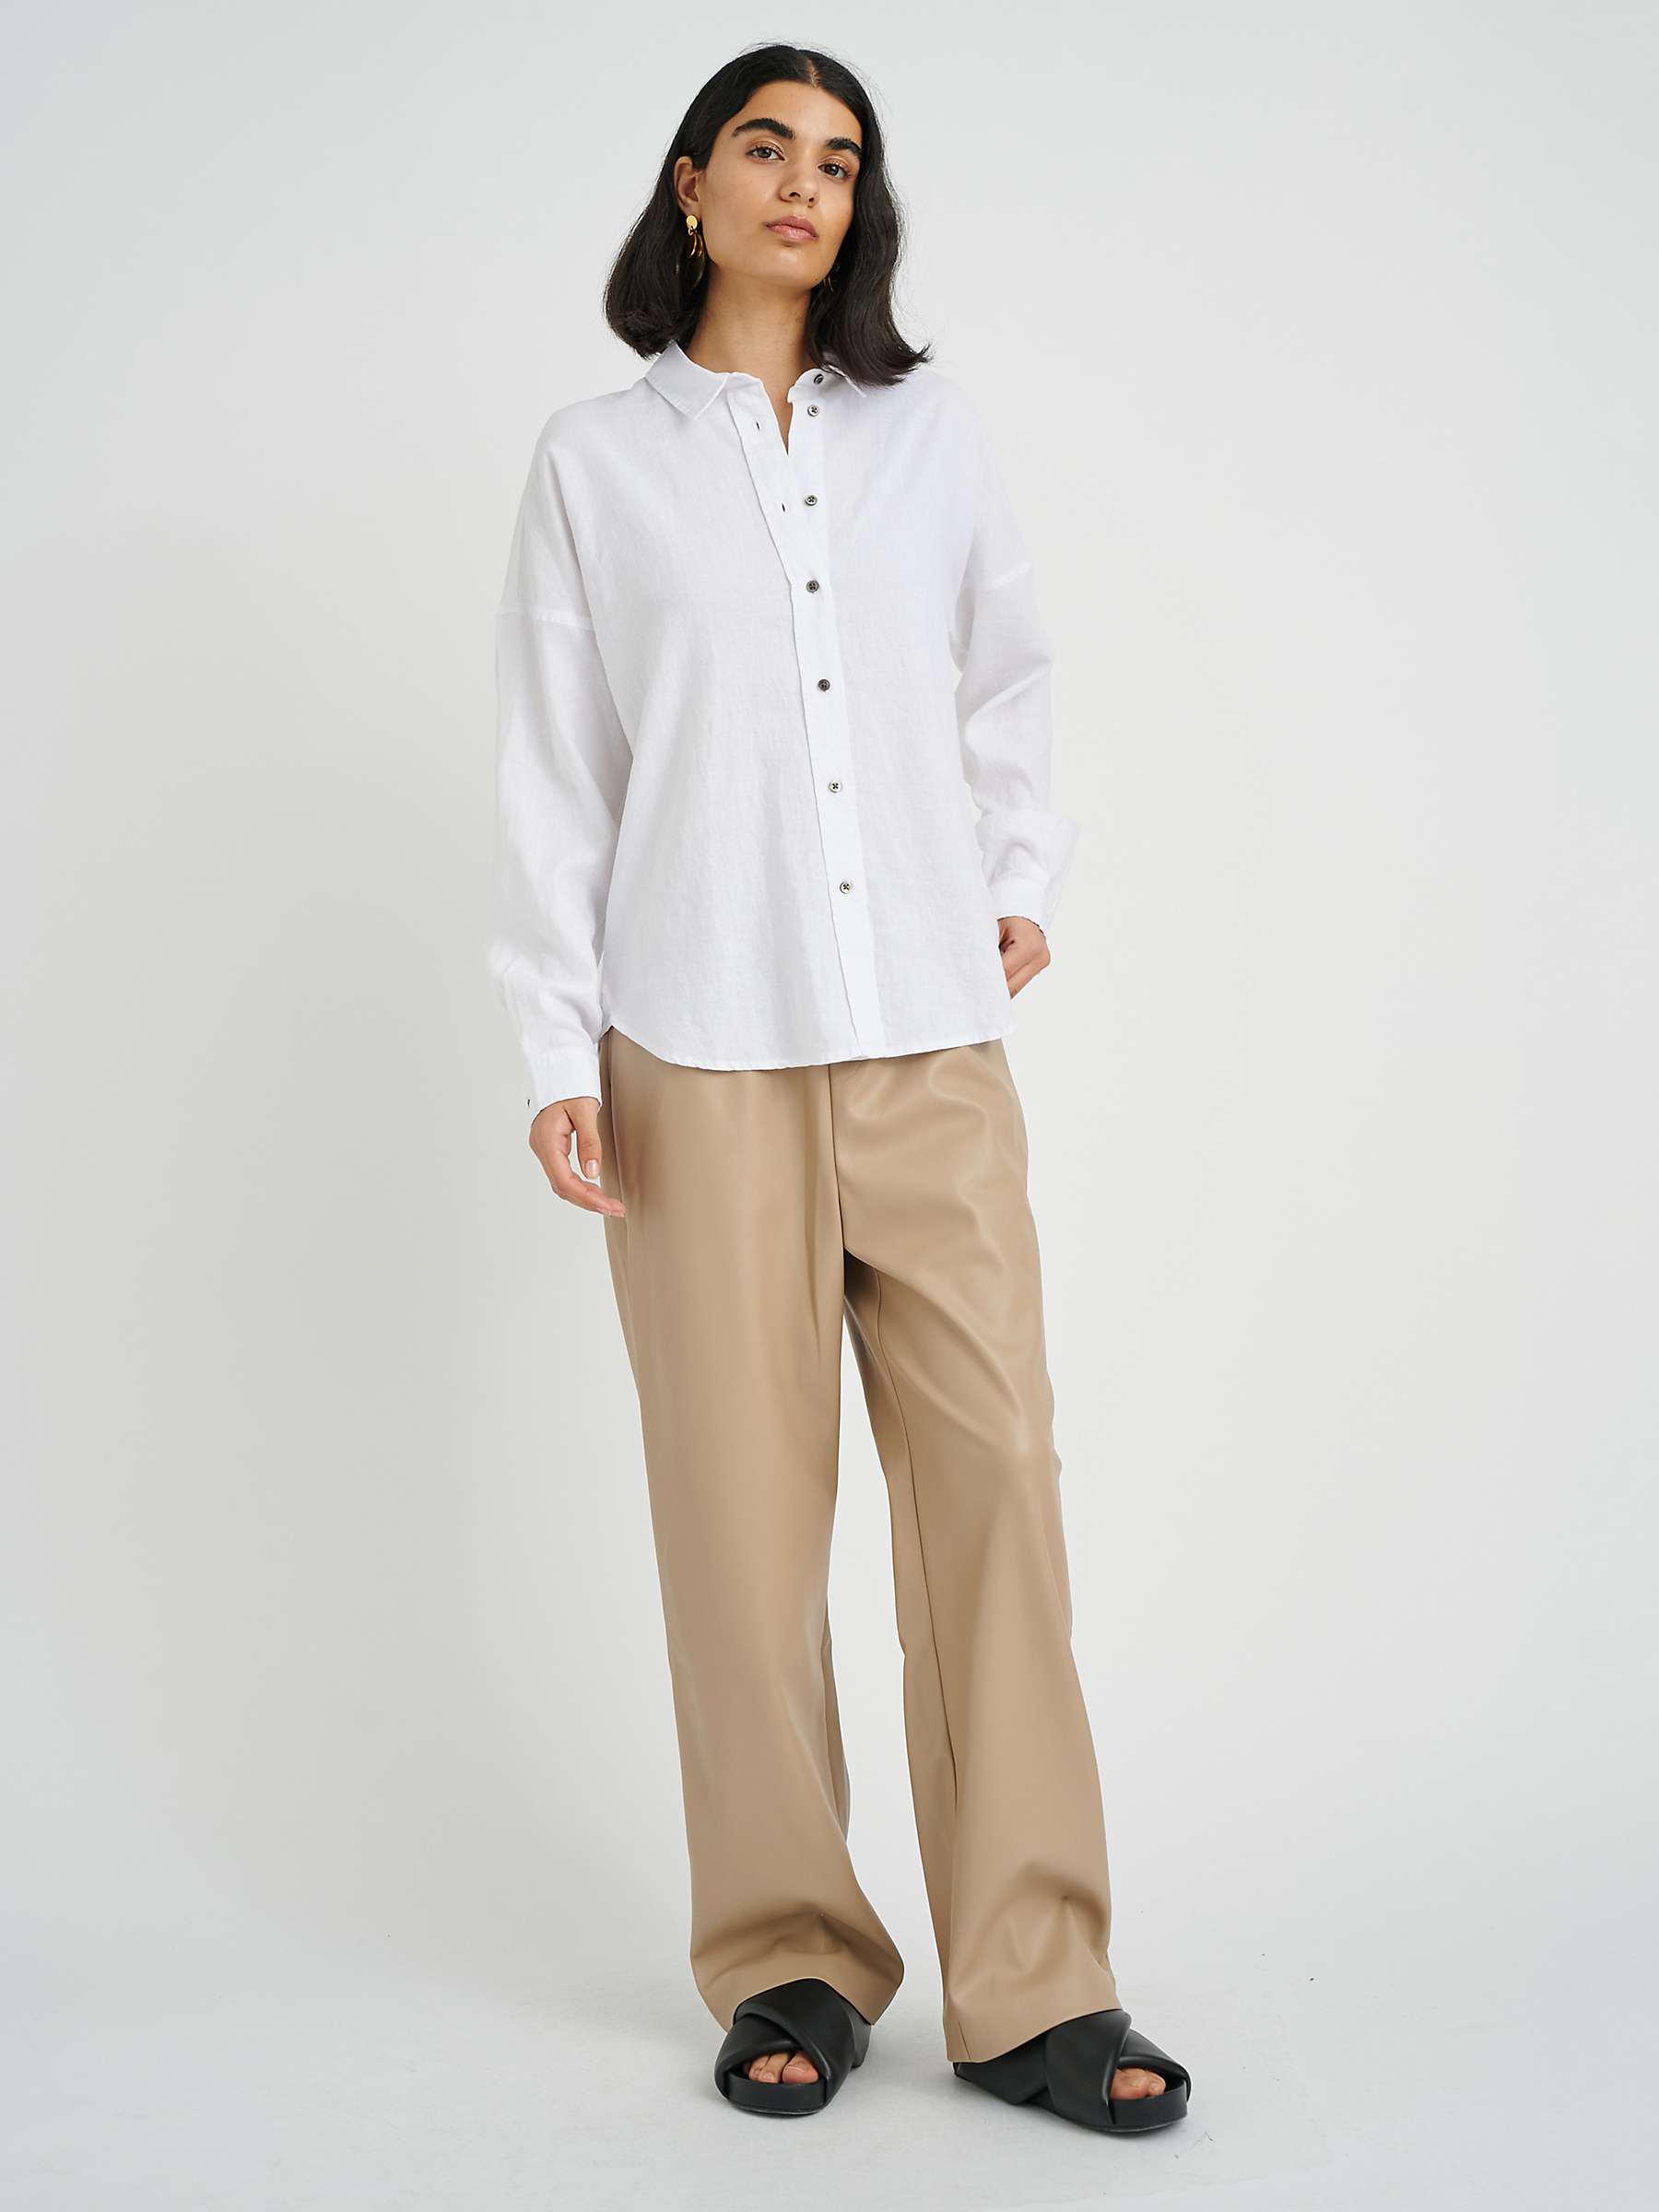 Buy InWear Amos Kiko Relaxed Fit Long Sleeve Shirt, Pure White Online at johnlewis.com